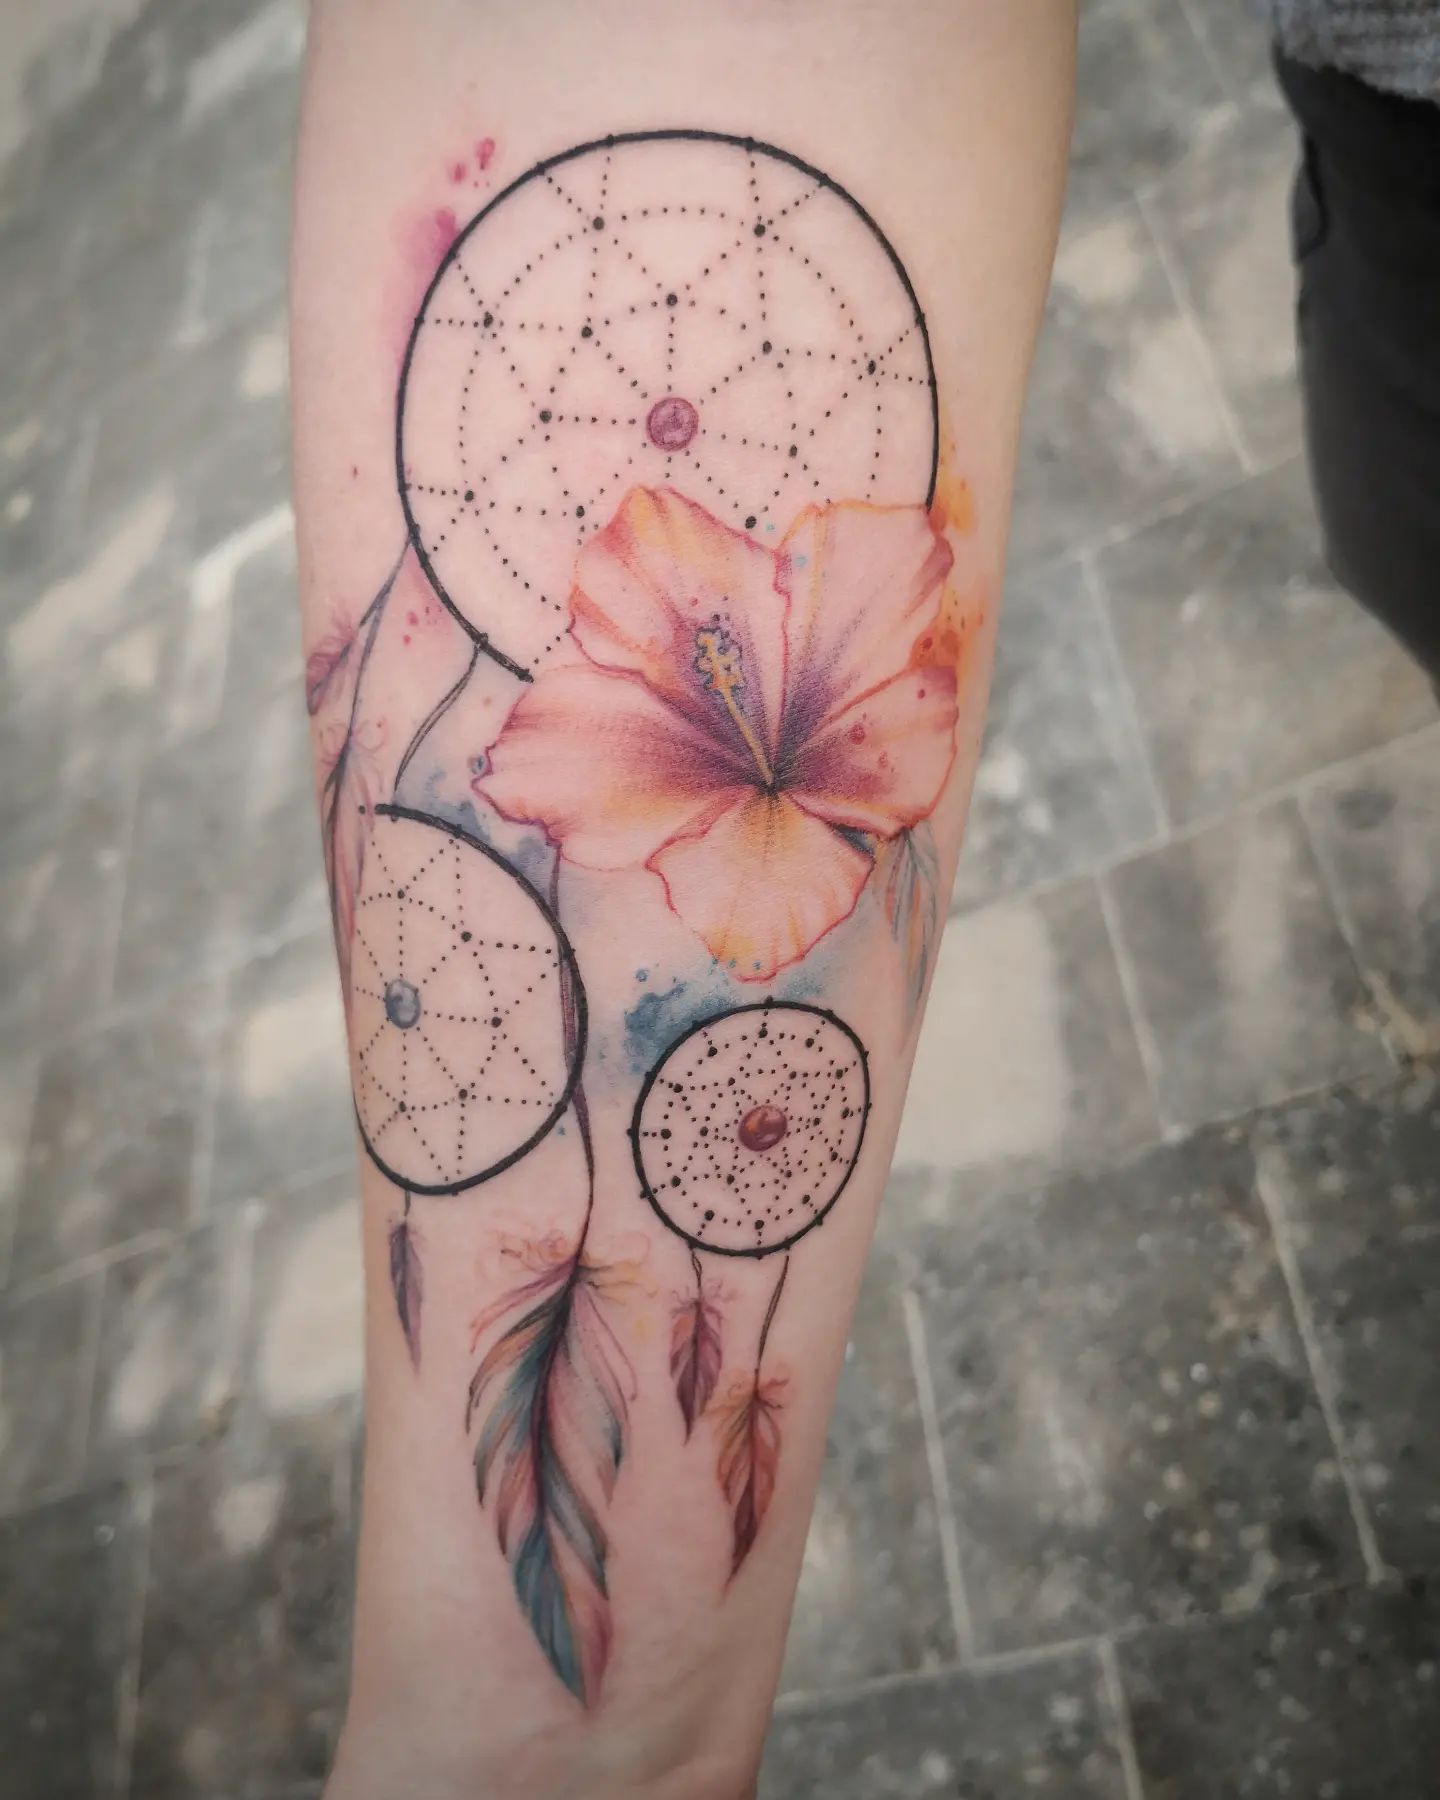 The Dream Catcher trio tattoo symbolizes the three people who have a special place in your heart. It also represents how these people are connected to each other in your life and how they will always be there for you.